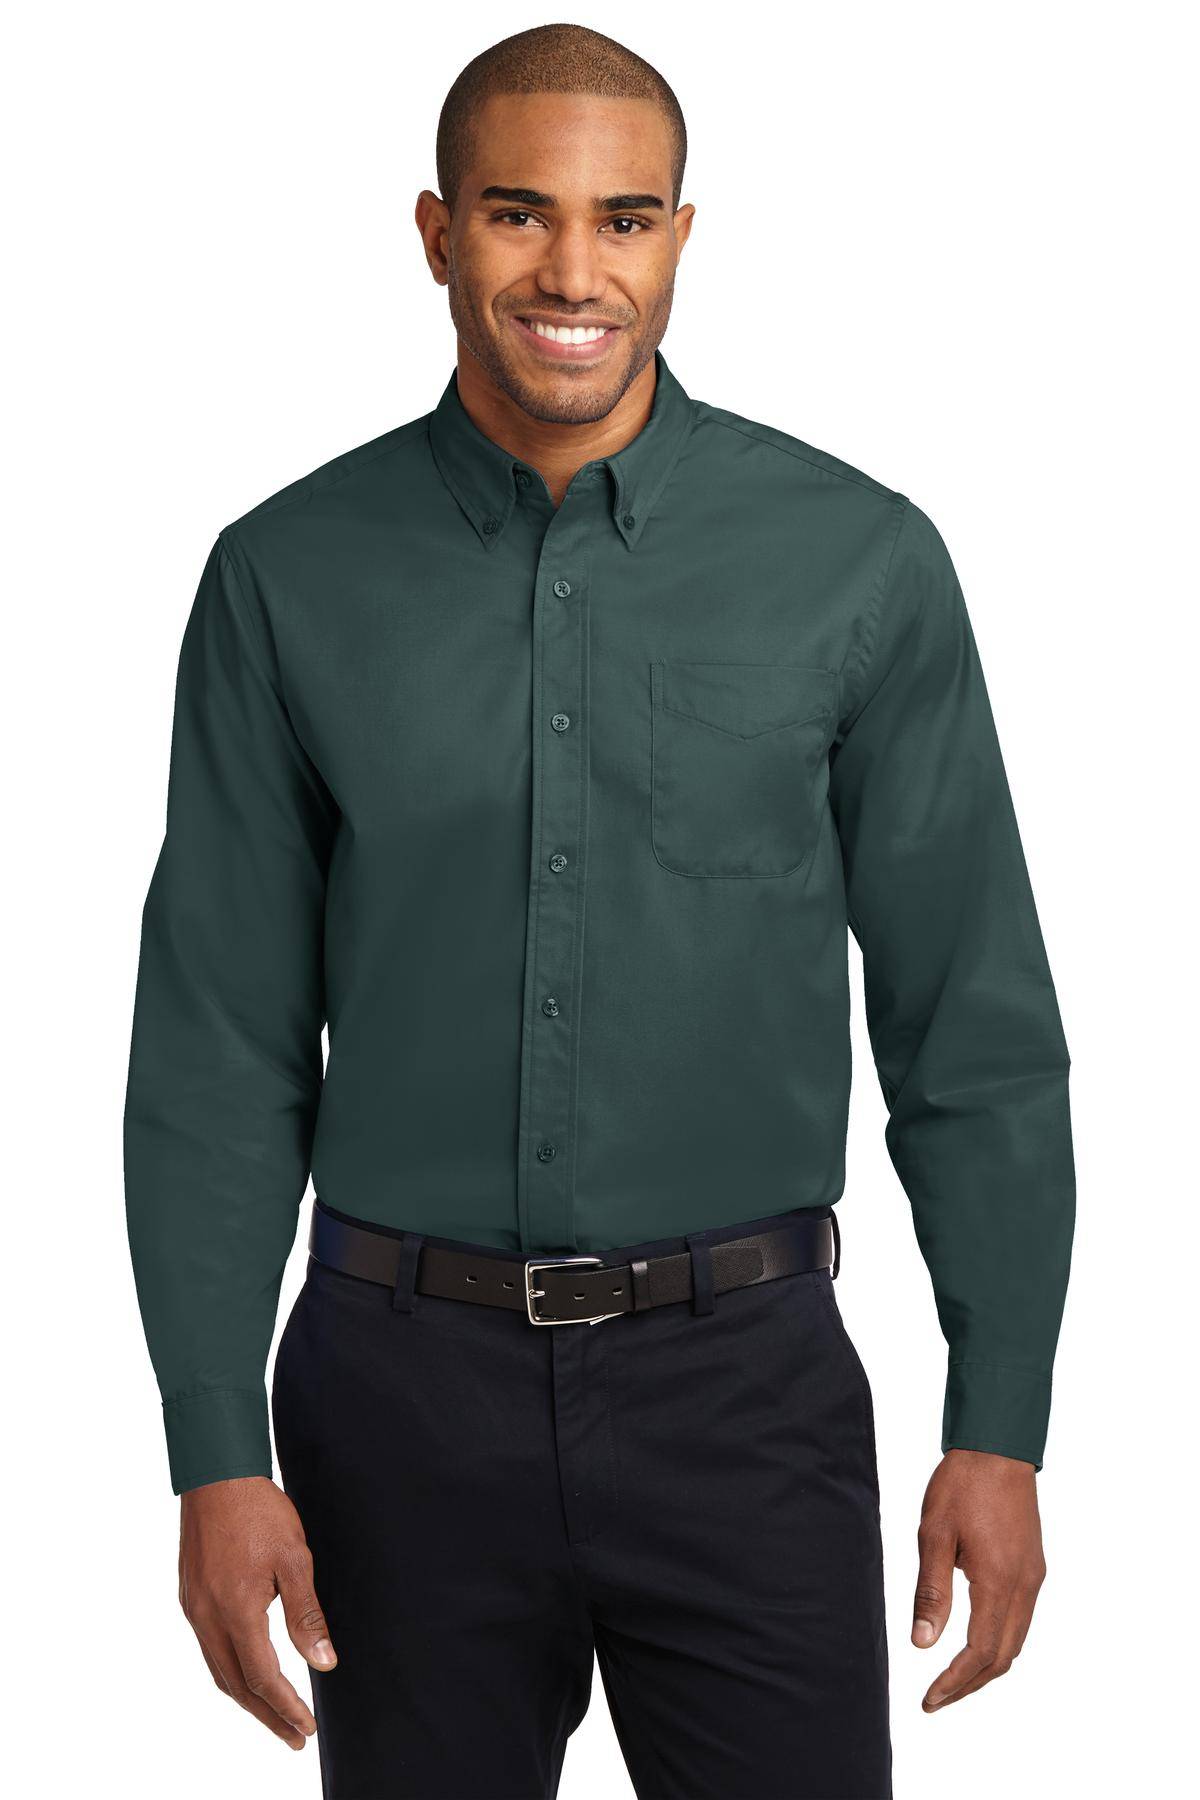 Selected Color is Dark Green/ Navy